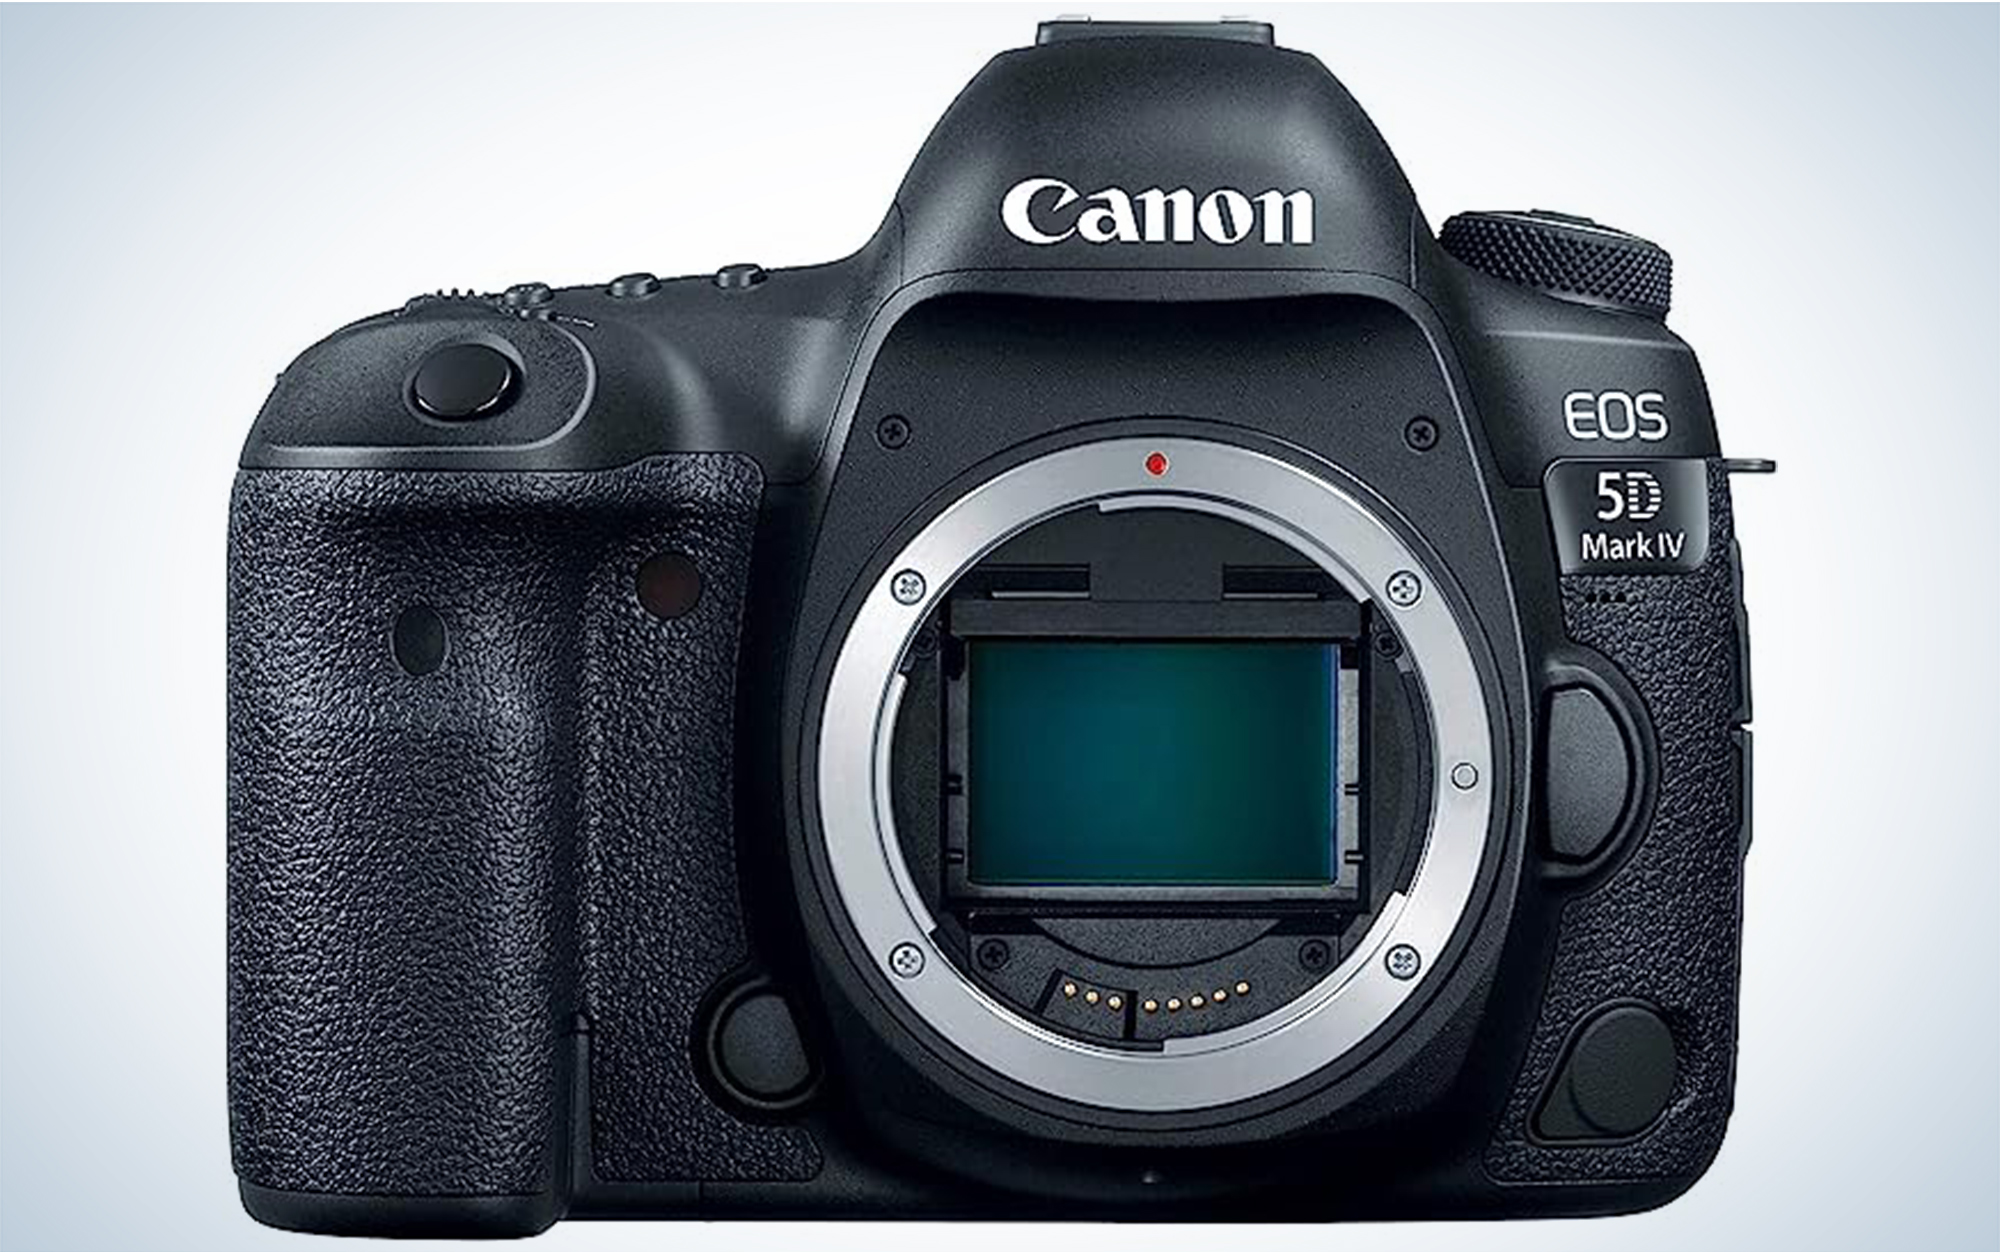 The Canon EOS 5D Mark IV is one of the best cameras for wildlife photography.